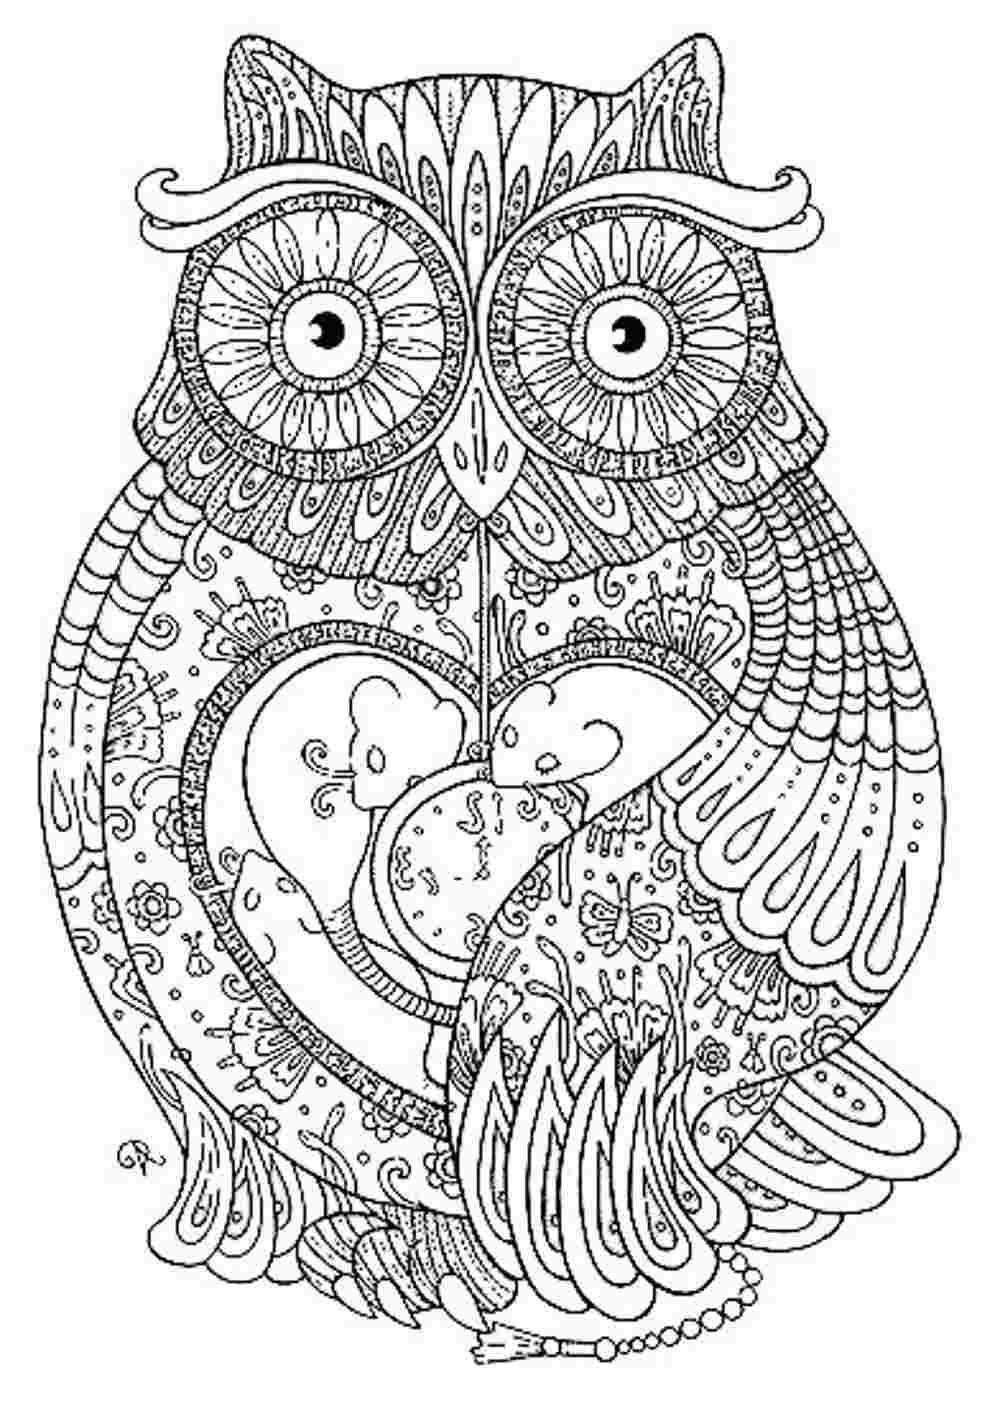 Adult Coloring Pages Owl
 Barn Owl Colouring Page The Barn Owl Trust